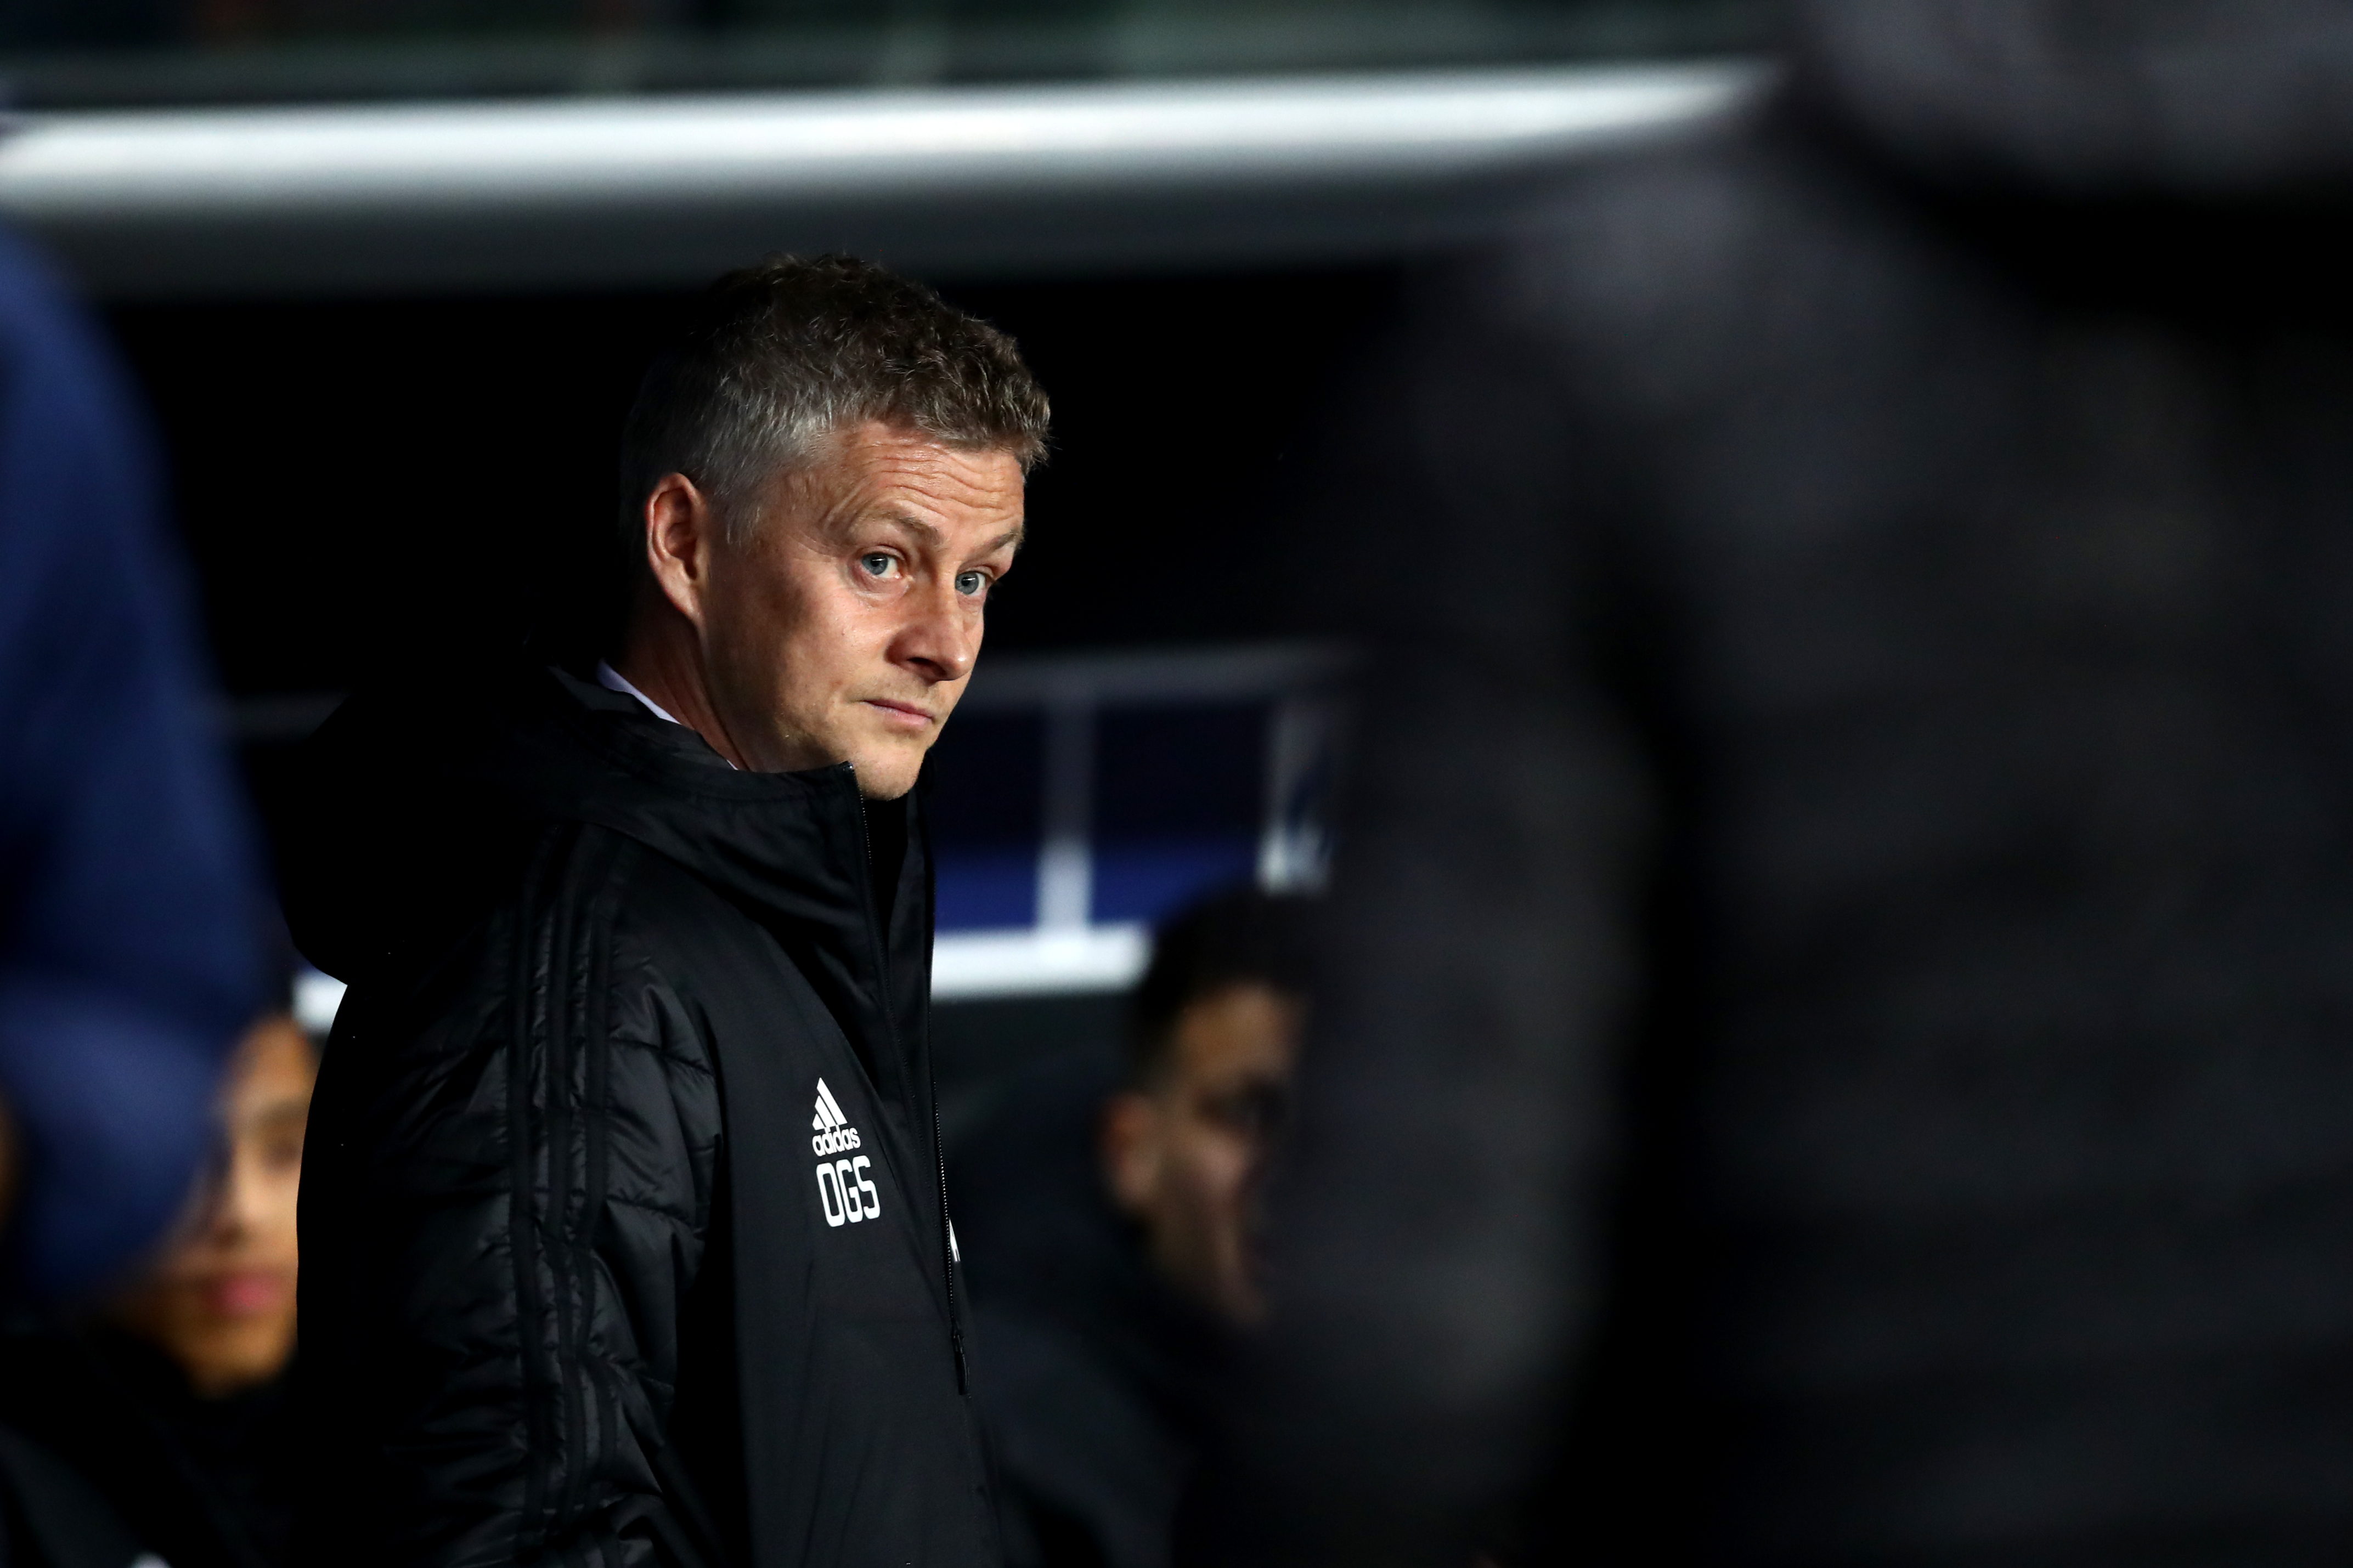 PARIS, FRANCE - MARCH 06:  Ole Gunnar Solskjaer, Manager of Manchester United during the UEFA Champions League Round of 16 Second Leg match between Paris Saint-Germain and Manchester United at Parc des Princes on March 06, 2019 in Paris, . (Photo by Julian Finney/Getty Images)